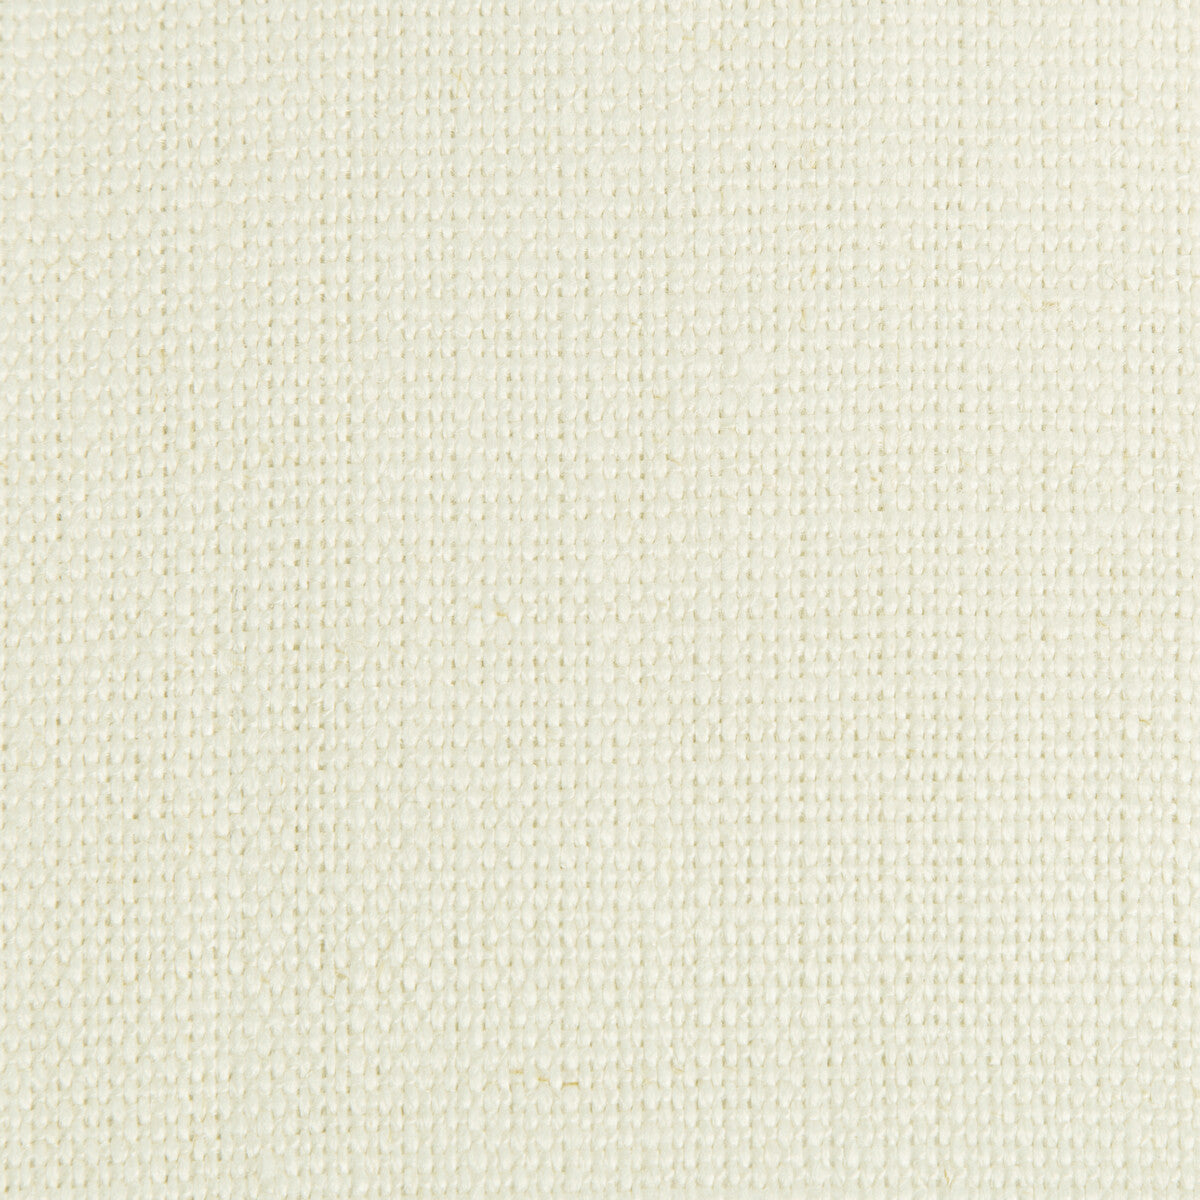 Buckley fabric in ivory color - pattern 30983.111.0 - by Kravet Design in the Thom Filicia collection